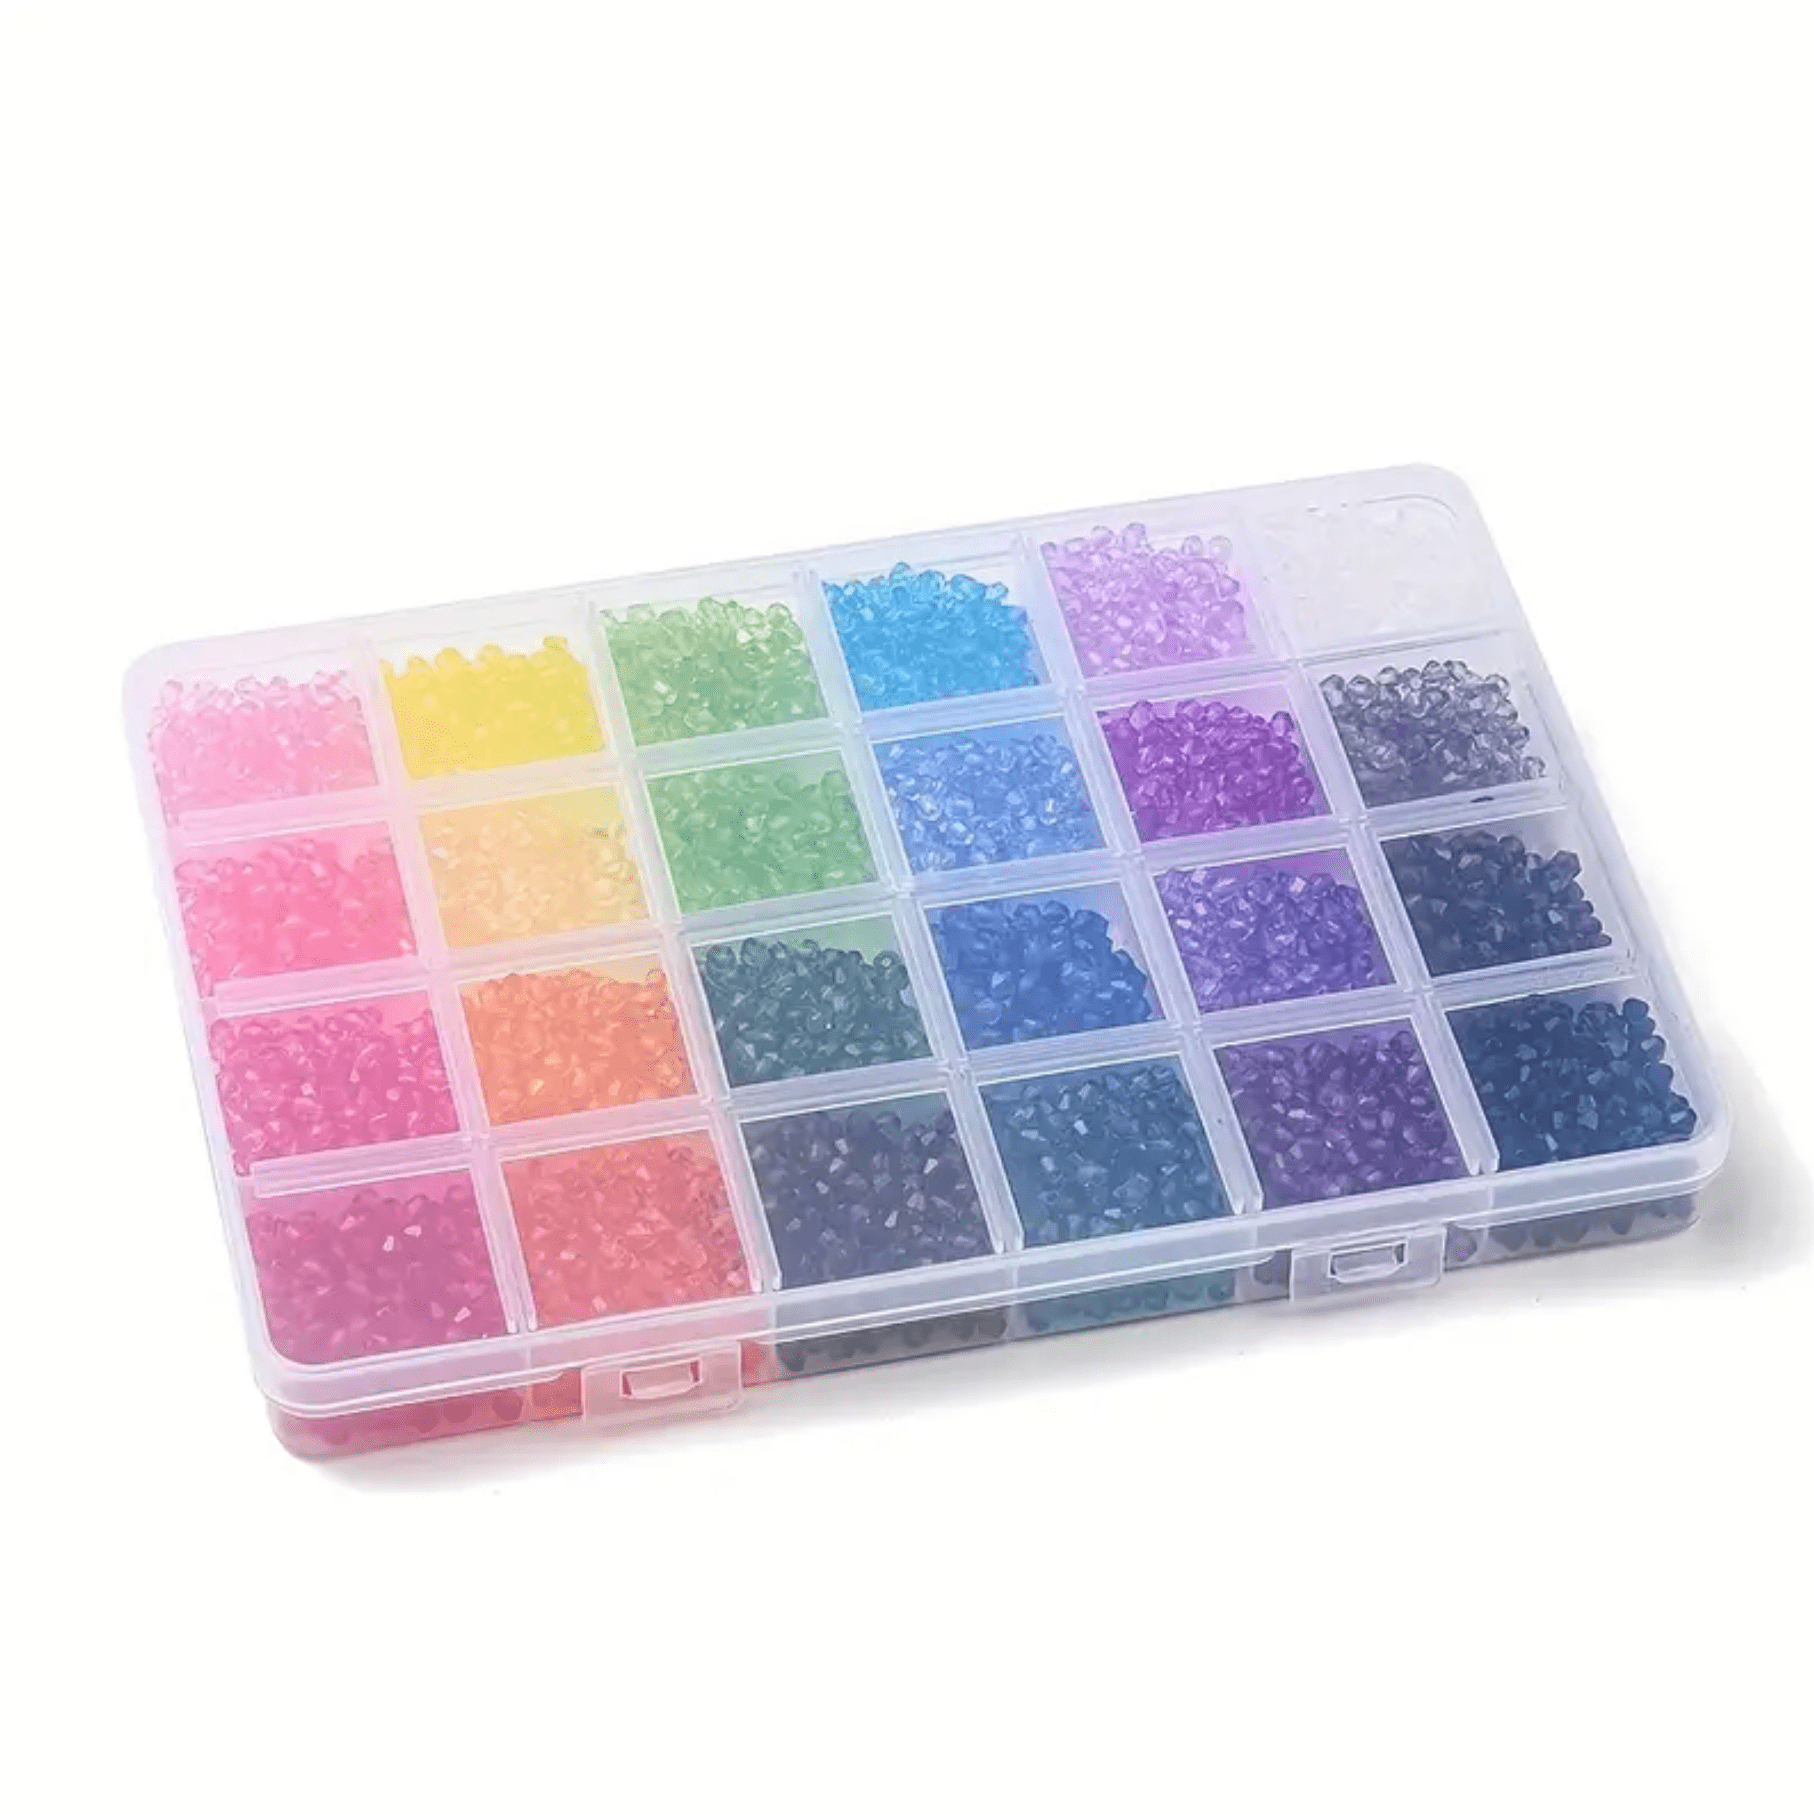 Multicolour Rainbow Kit - 24 Colours of 4mm Transparent Acrylic Bicone Beads Kit Bicone Beads